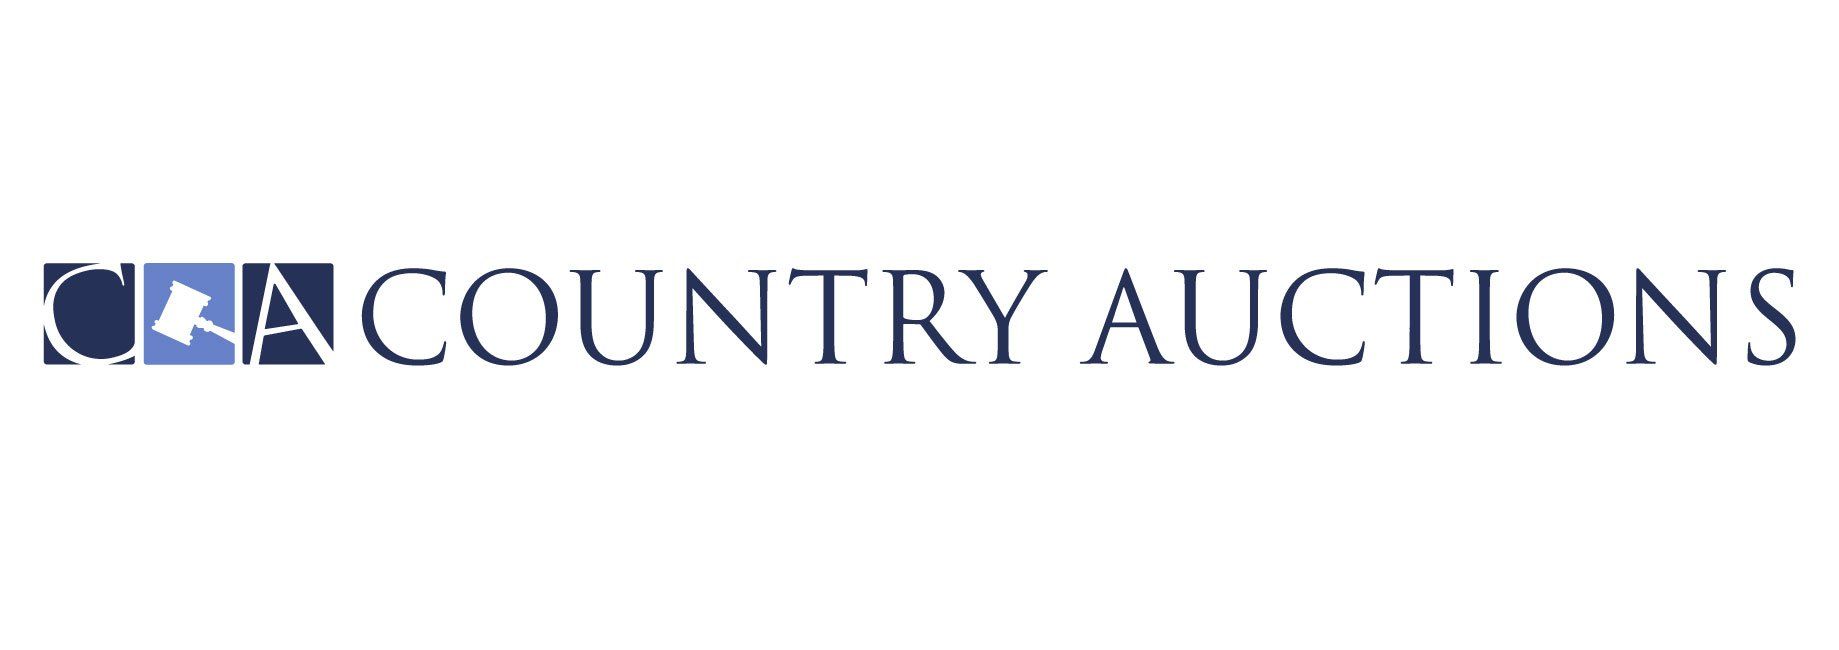 country auction logo